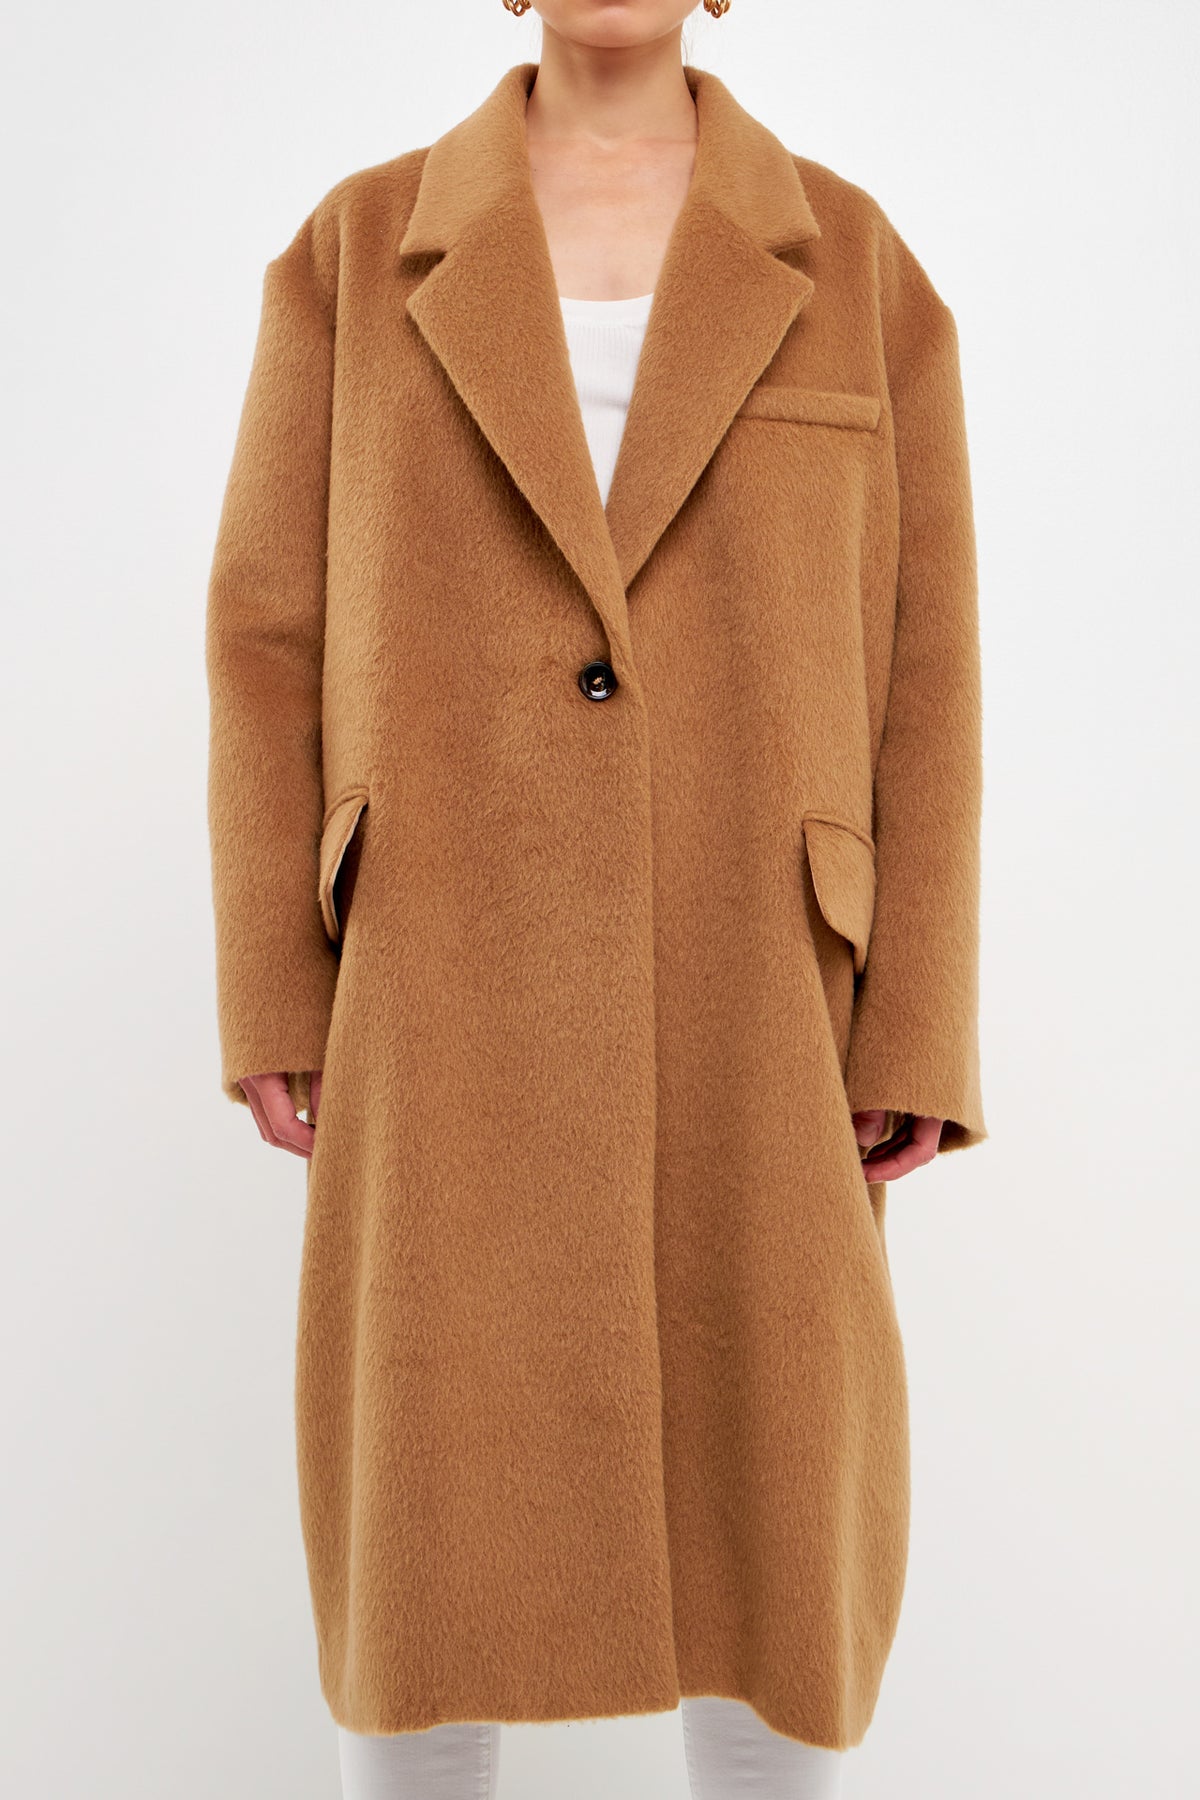 ENDLESS ROSE - Single Button Coat - COATS available at Objectrare